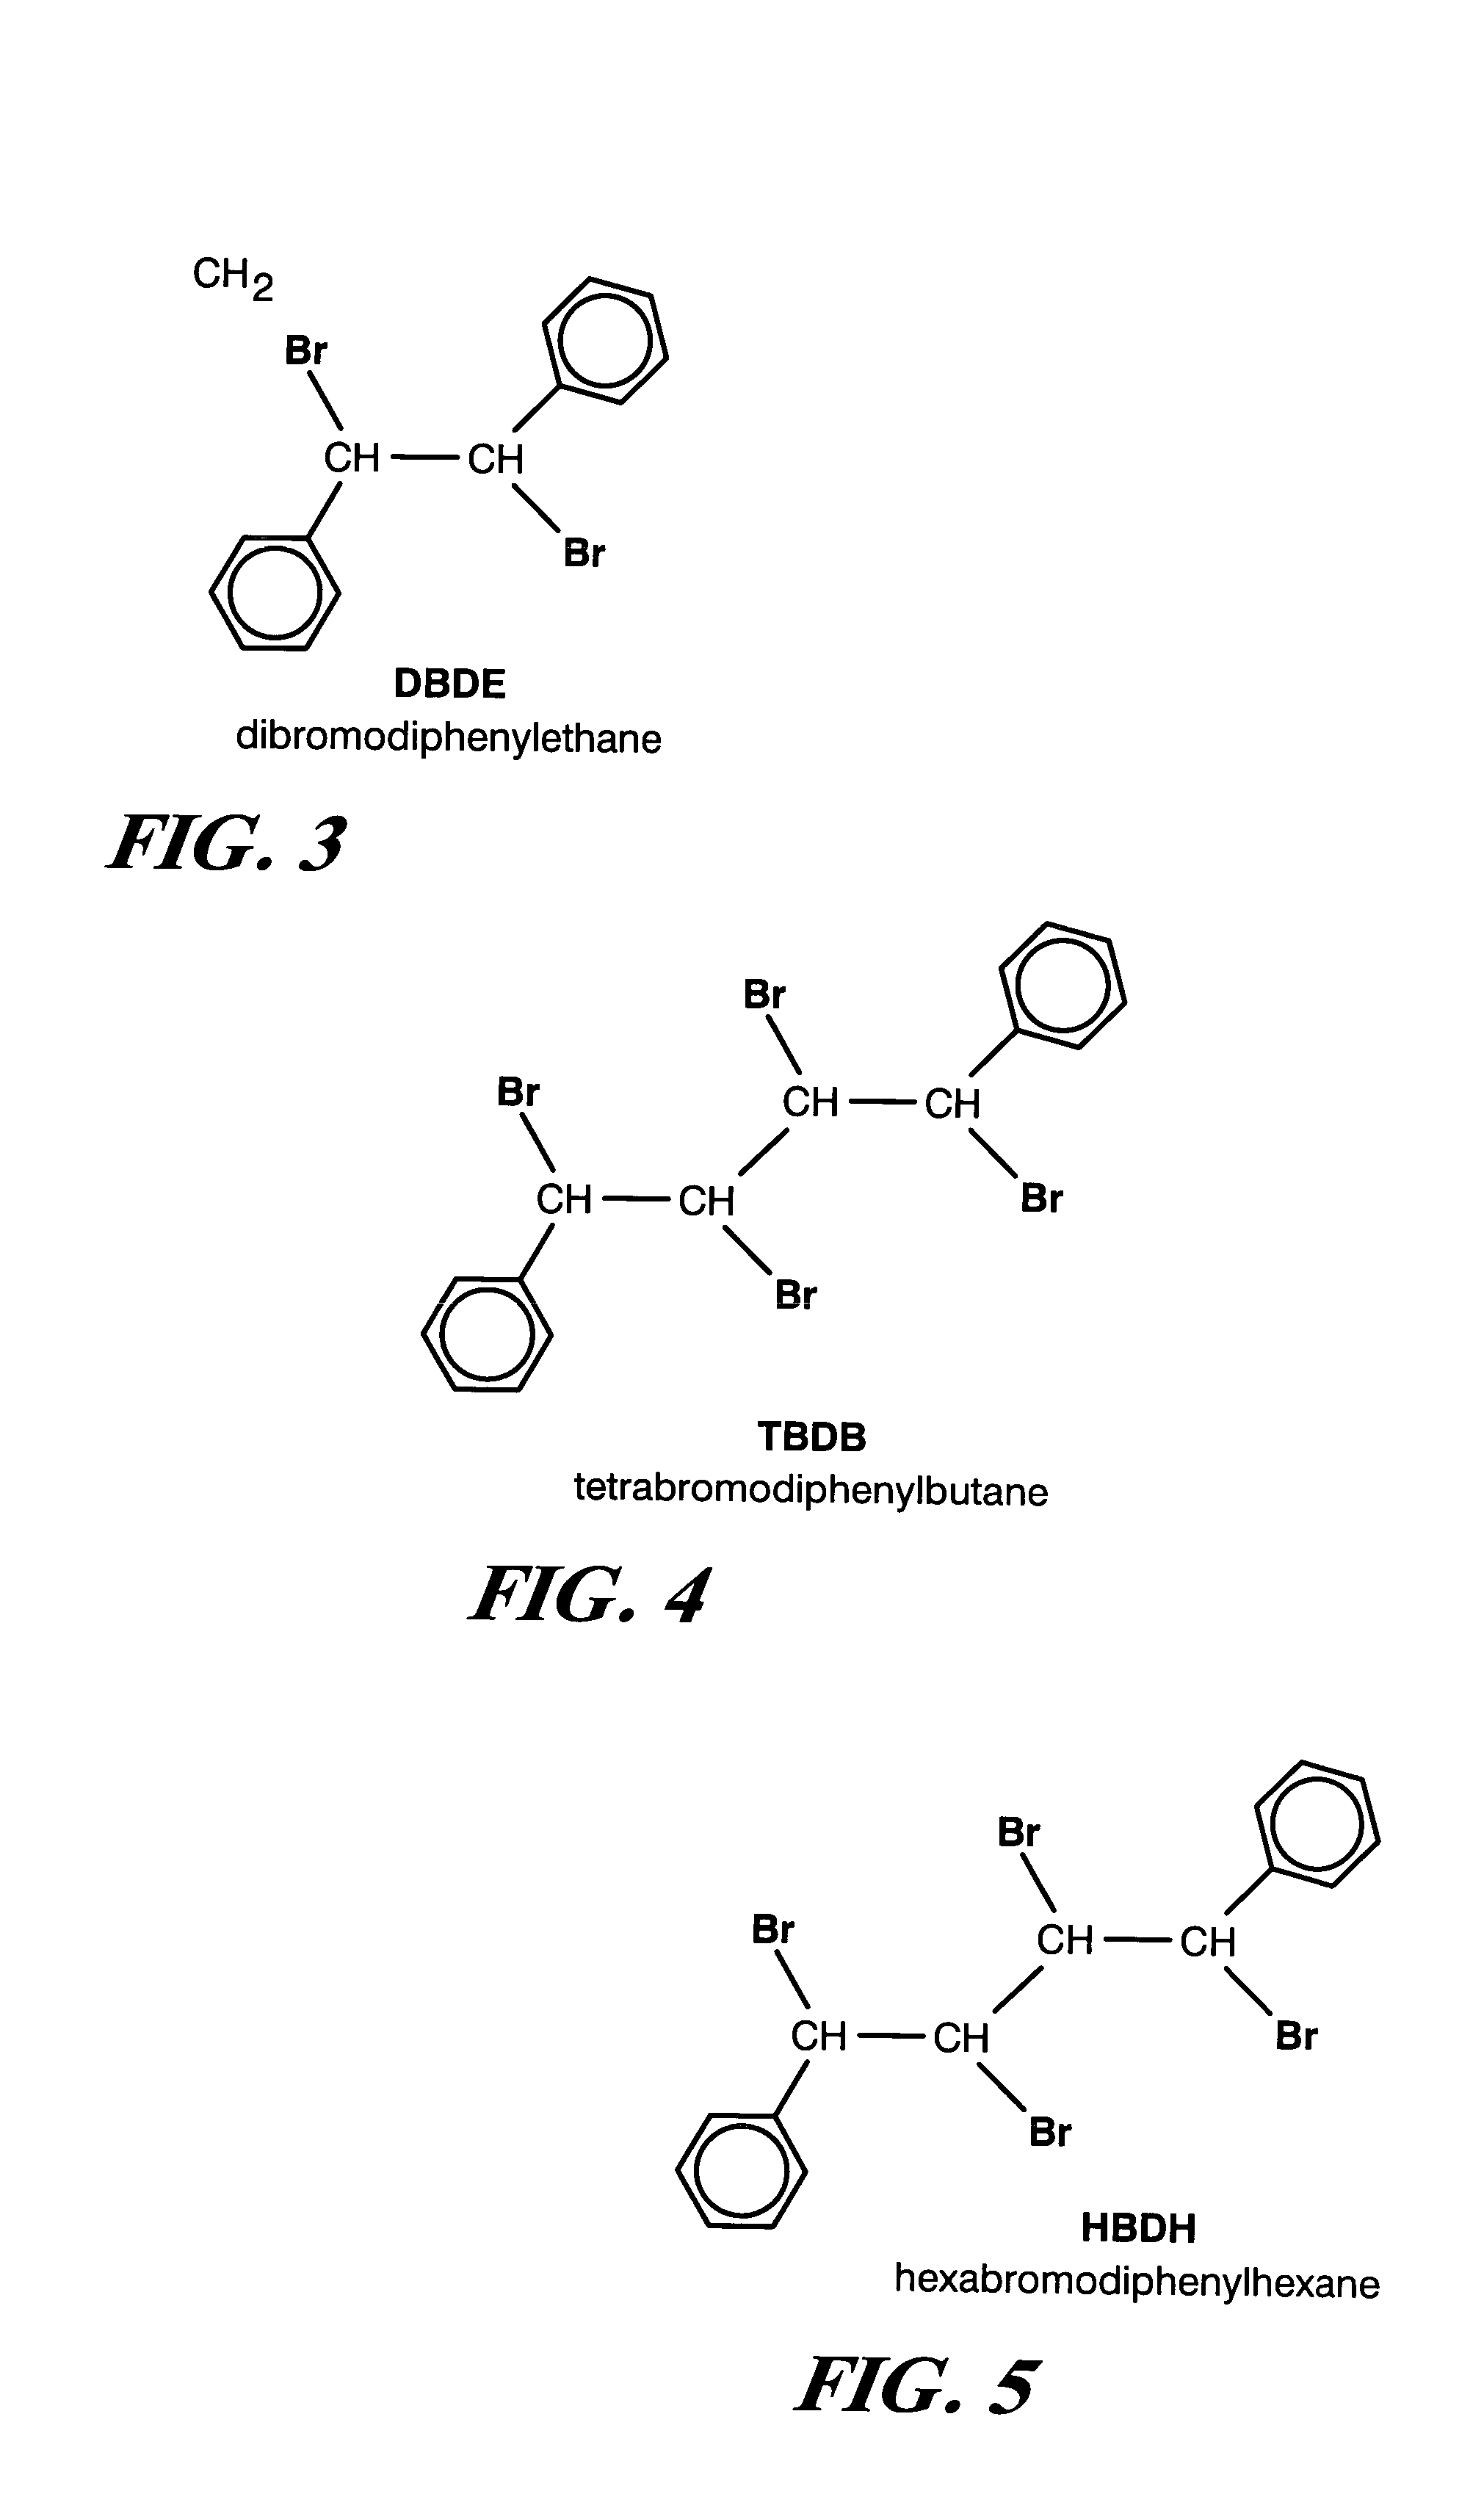 Method of incorporating brominated compounds as additives to expanded polystyrene molded patterns for use in lost foam aluminum casting